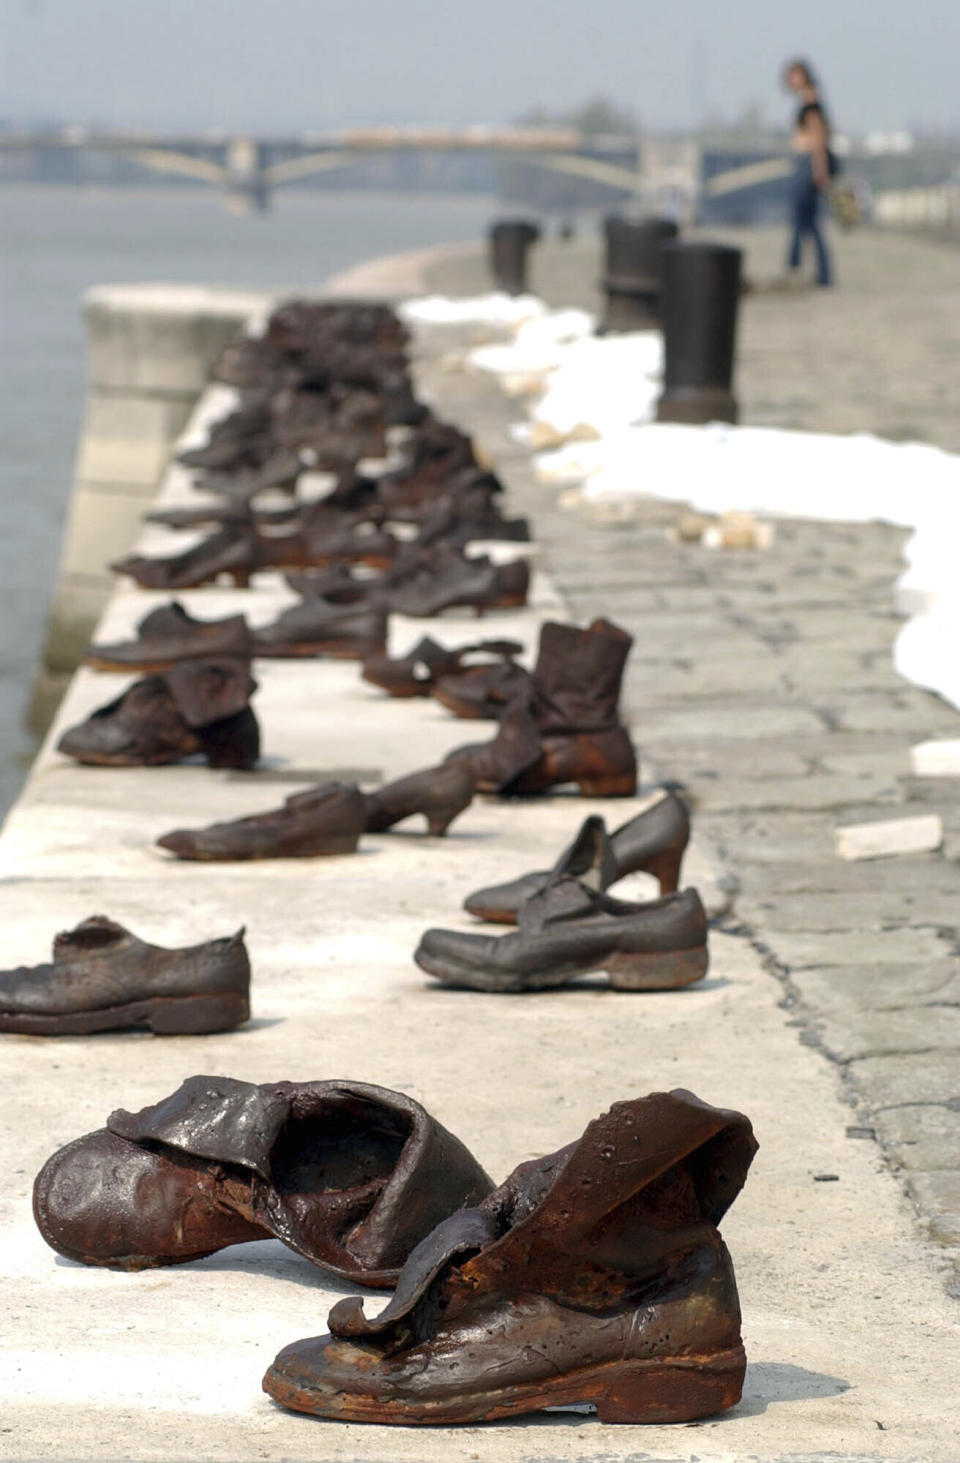 FILE - A view of the monument consisting of 60 contemporary shoes made of cast iron in memory of the Jewish people who were shot into the River Danube by members of the Hungarian Nazi party, the so-called Arrow-Cross Party during World War II, at the quay of the River in Budapest, Friday April 15, 2005. In a video address Friday, March 25, 2022 to a summit of EU leaders, Ukrainian President Volodymyr Zelenskyy made a frank, direct appeal to Hungary Prime Minister Viktor Orban to take a clearer stance on Russia's war on Ukraine and support his besieged country. Zelenskyy recalled that Hungary's capital of Budapest had experienced the horrors of war in the 20th century, and referred to a memorial of bronze shoes on the Danube river that pays tribute to the Hungarian Jews executed by German and Hungarian fascists in World War II. (AP Photo/MTI, Barnabas Honeczy, File )